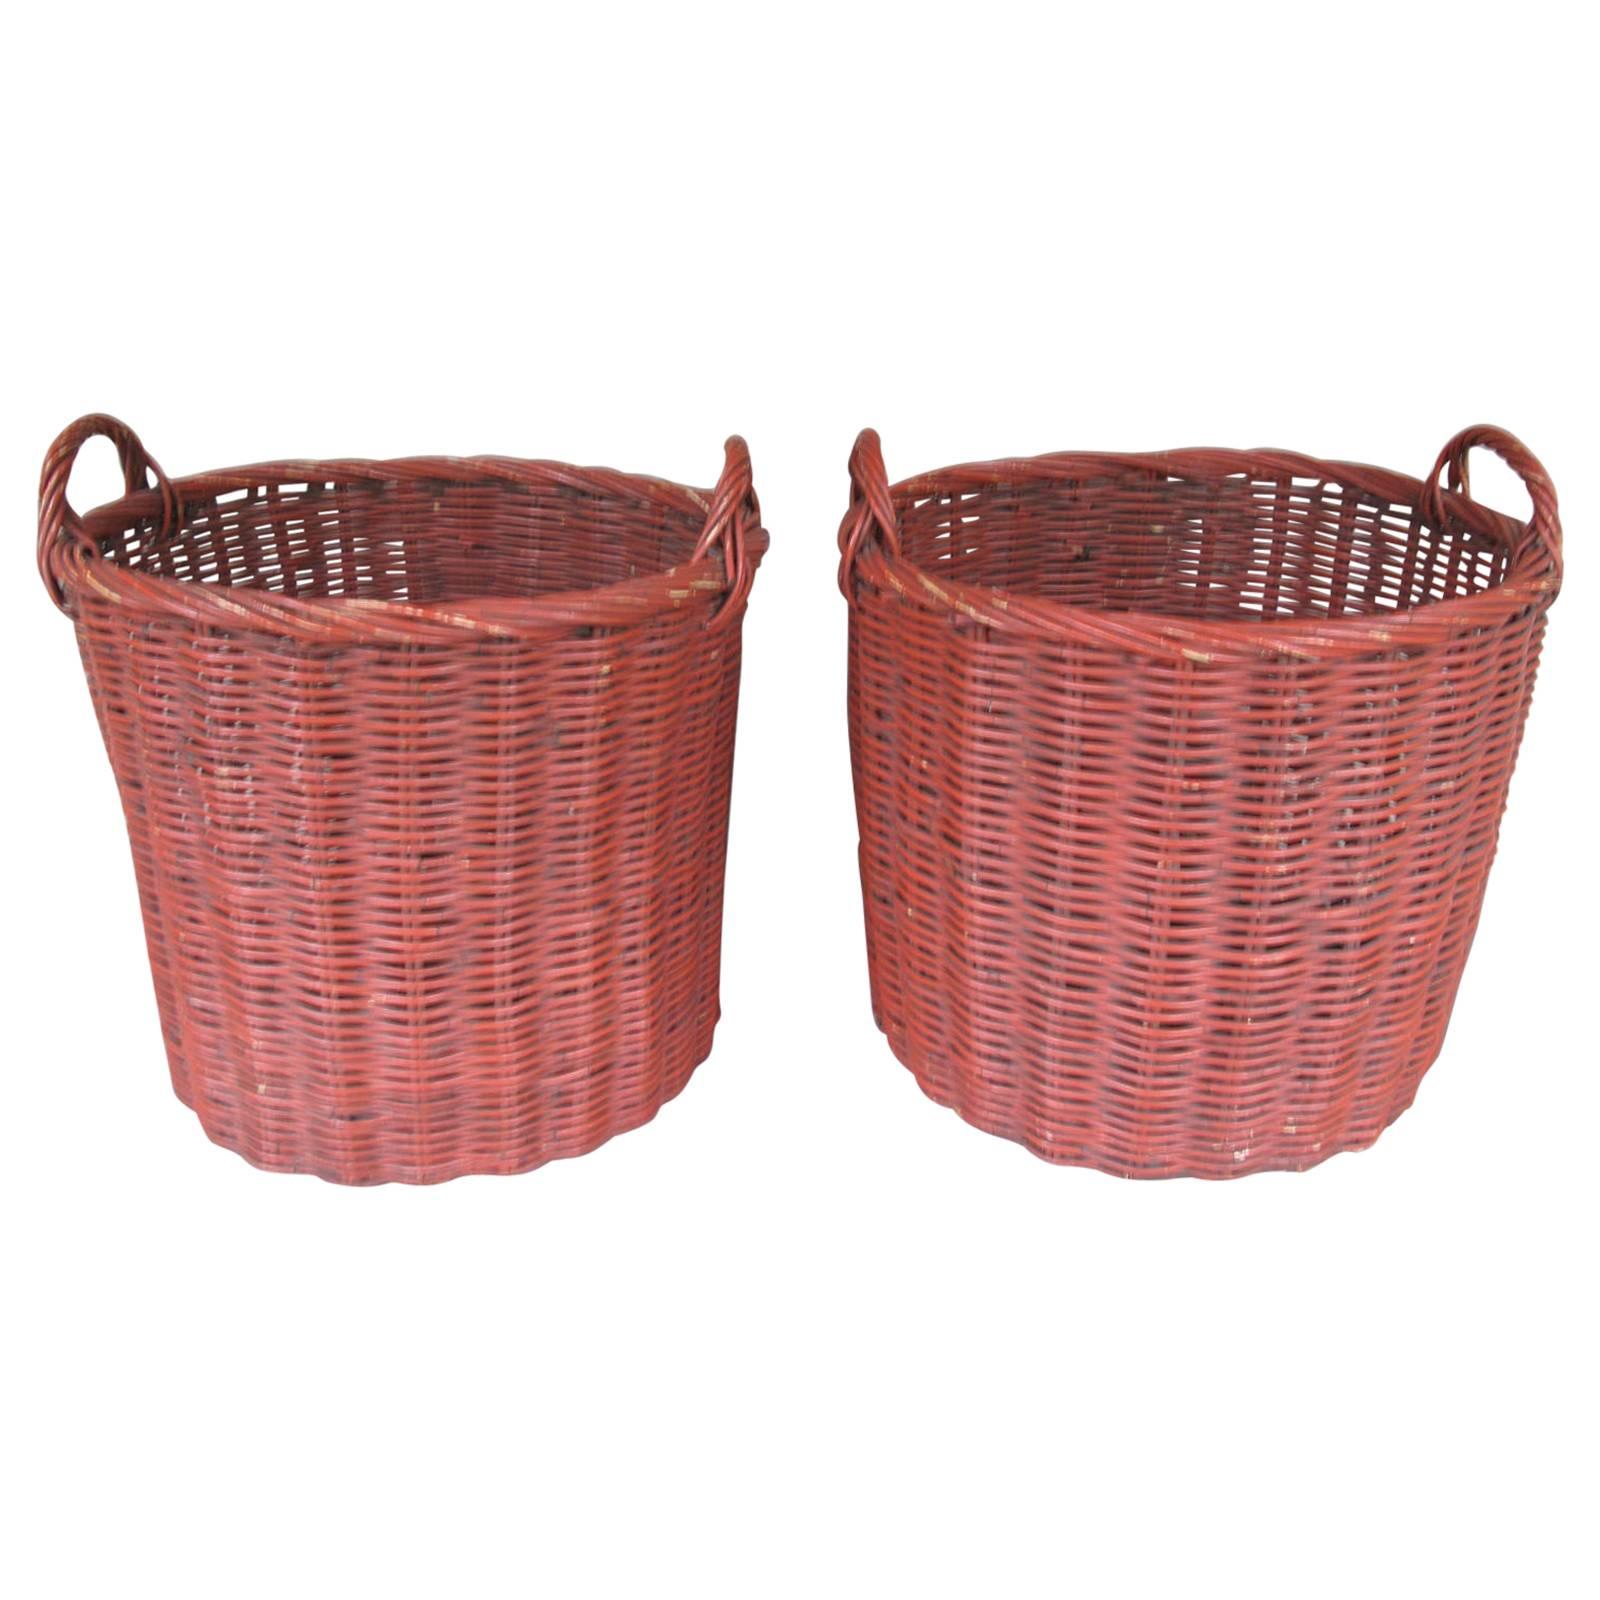 Pair of Large Woven Baskets in Red Paint